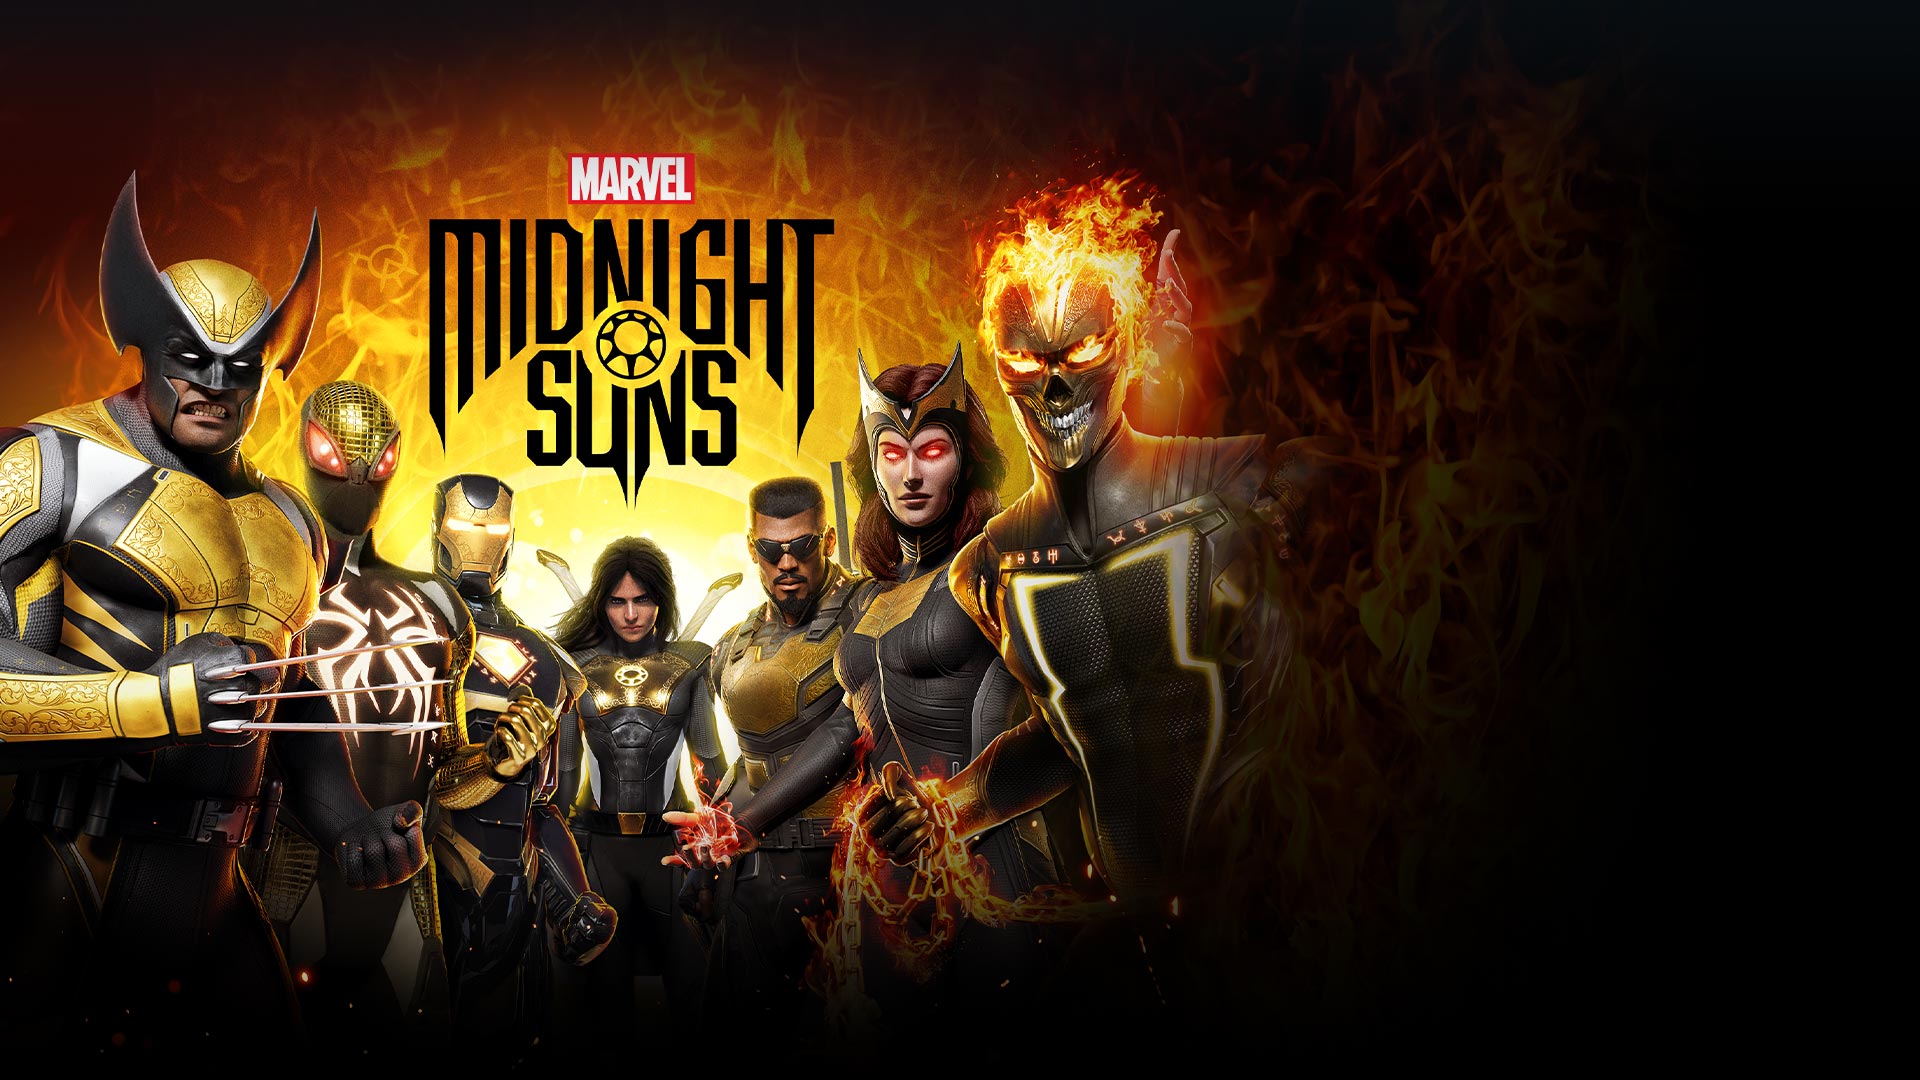 Marvel Midnight Suns, a group of super heroes including Wolverine, Ironman, Ghost Rider and Blade.